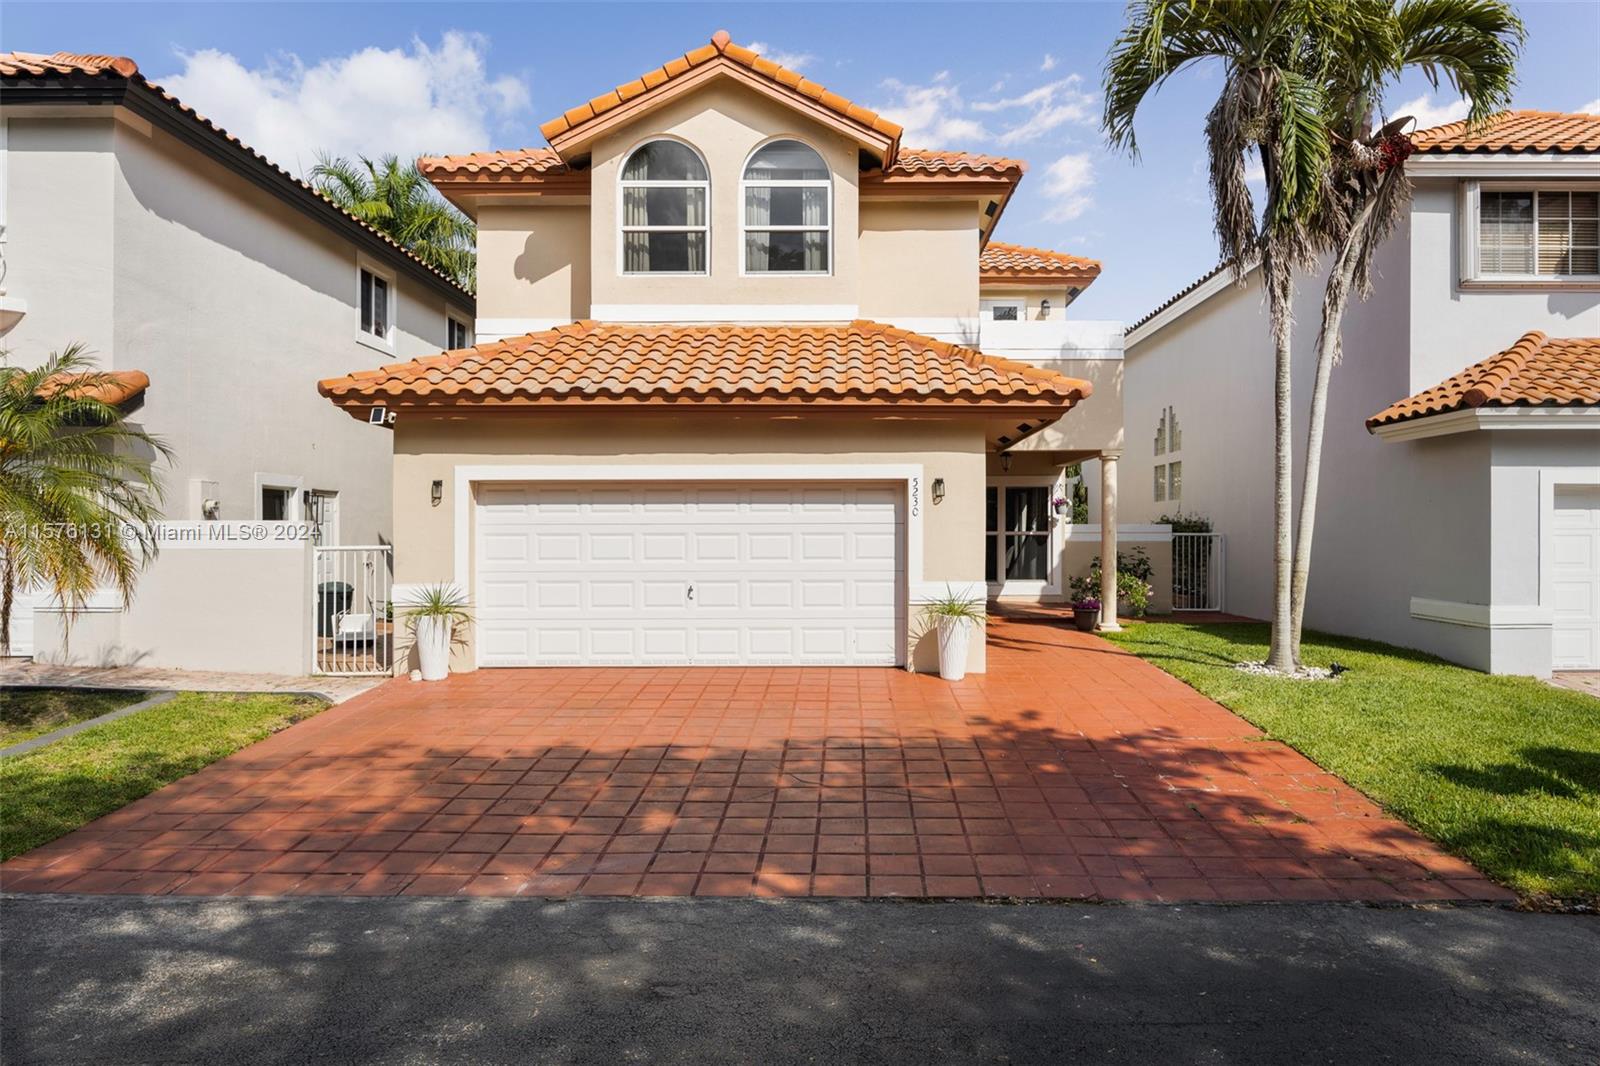 This stunning, furnished single-family home in gated Doral Palms Estates boasts modern elegance and spacious comfort throughout its 4BD, 2.5BA and 2,7373 SF of living space on a quiet cul-de-sac. Enjoy a chef's kitchen with premium appliances, quartz countertops, and sleek cabinetry. Entertain in style indoors or out on your private patio with grill and fire pit.  Retreat to the expansive primary suite, where you'll find a serene oasis complete with a luxurious ensuite bathroom, walk-in closet. Home has a laundry room and attached 2-car garage with ample storage and workout area. Exclusive gated community amenities include clubhouse, pool, tennis and pickleball courts. Close to schools, Morgan Levy Park. Available July 1st for annual term lease.